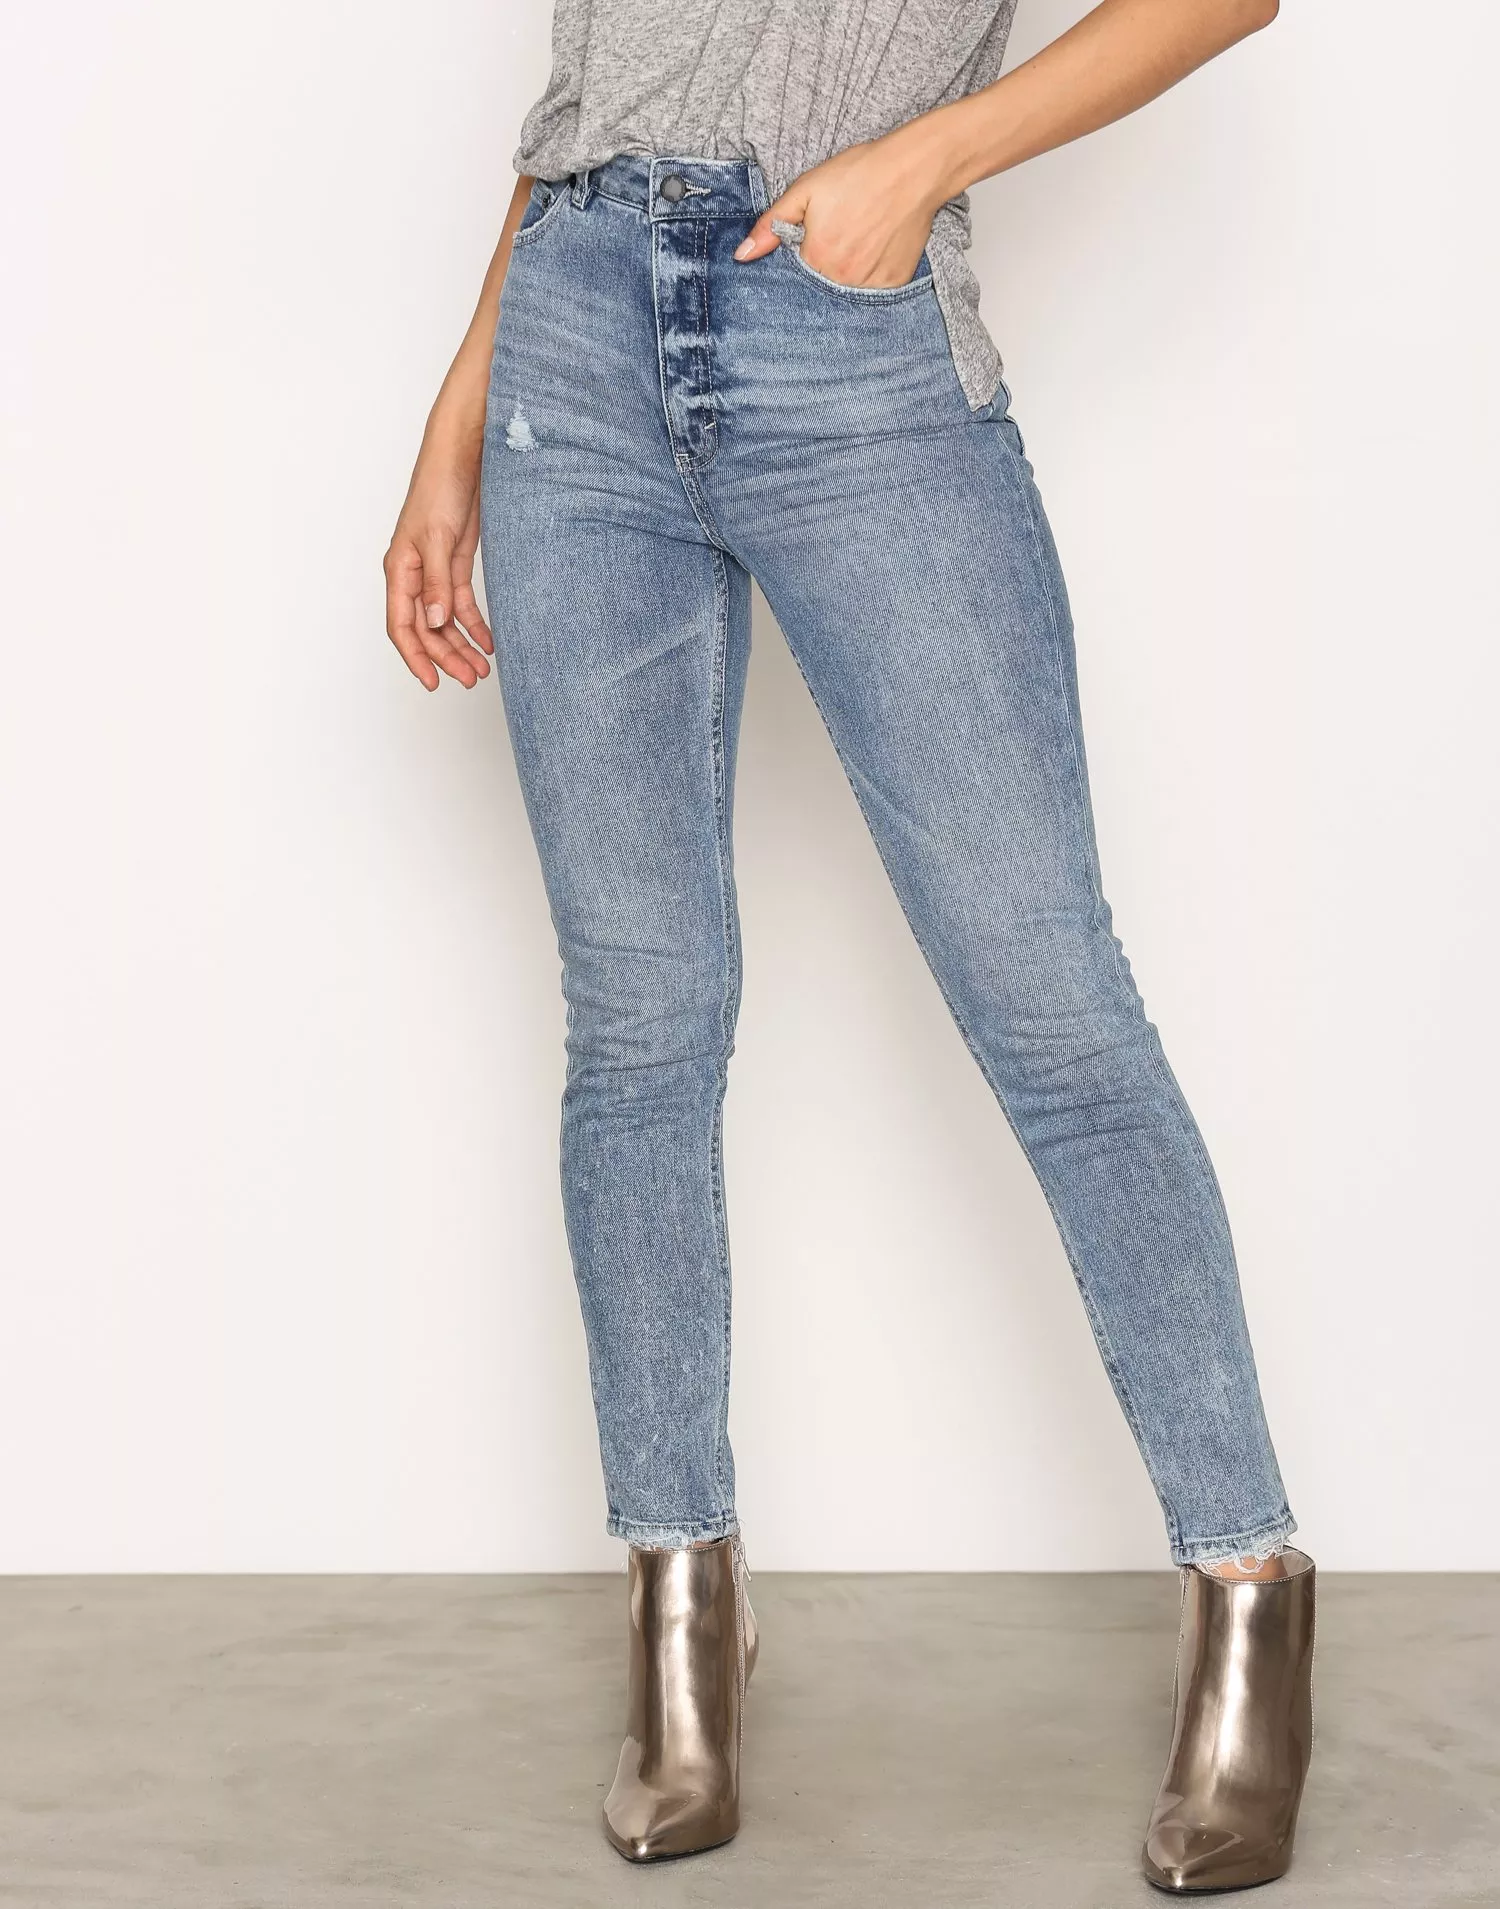 Lima Bier Gewoon doen Buy Cheap Monday Donna Washed Out - Washed | Nelly.com